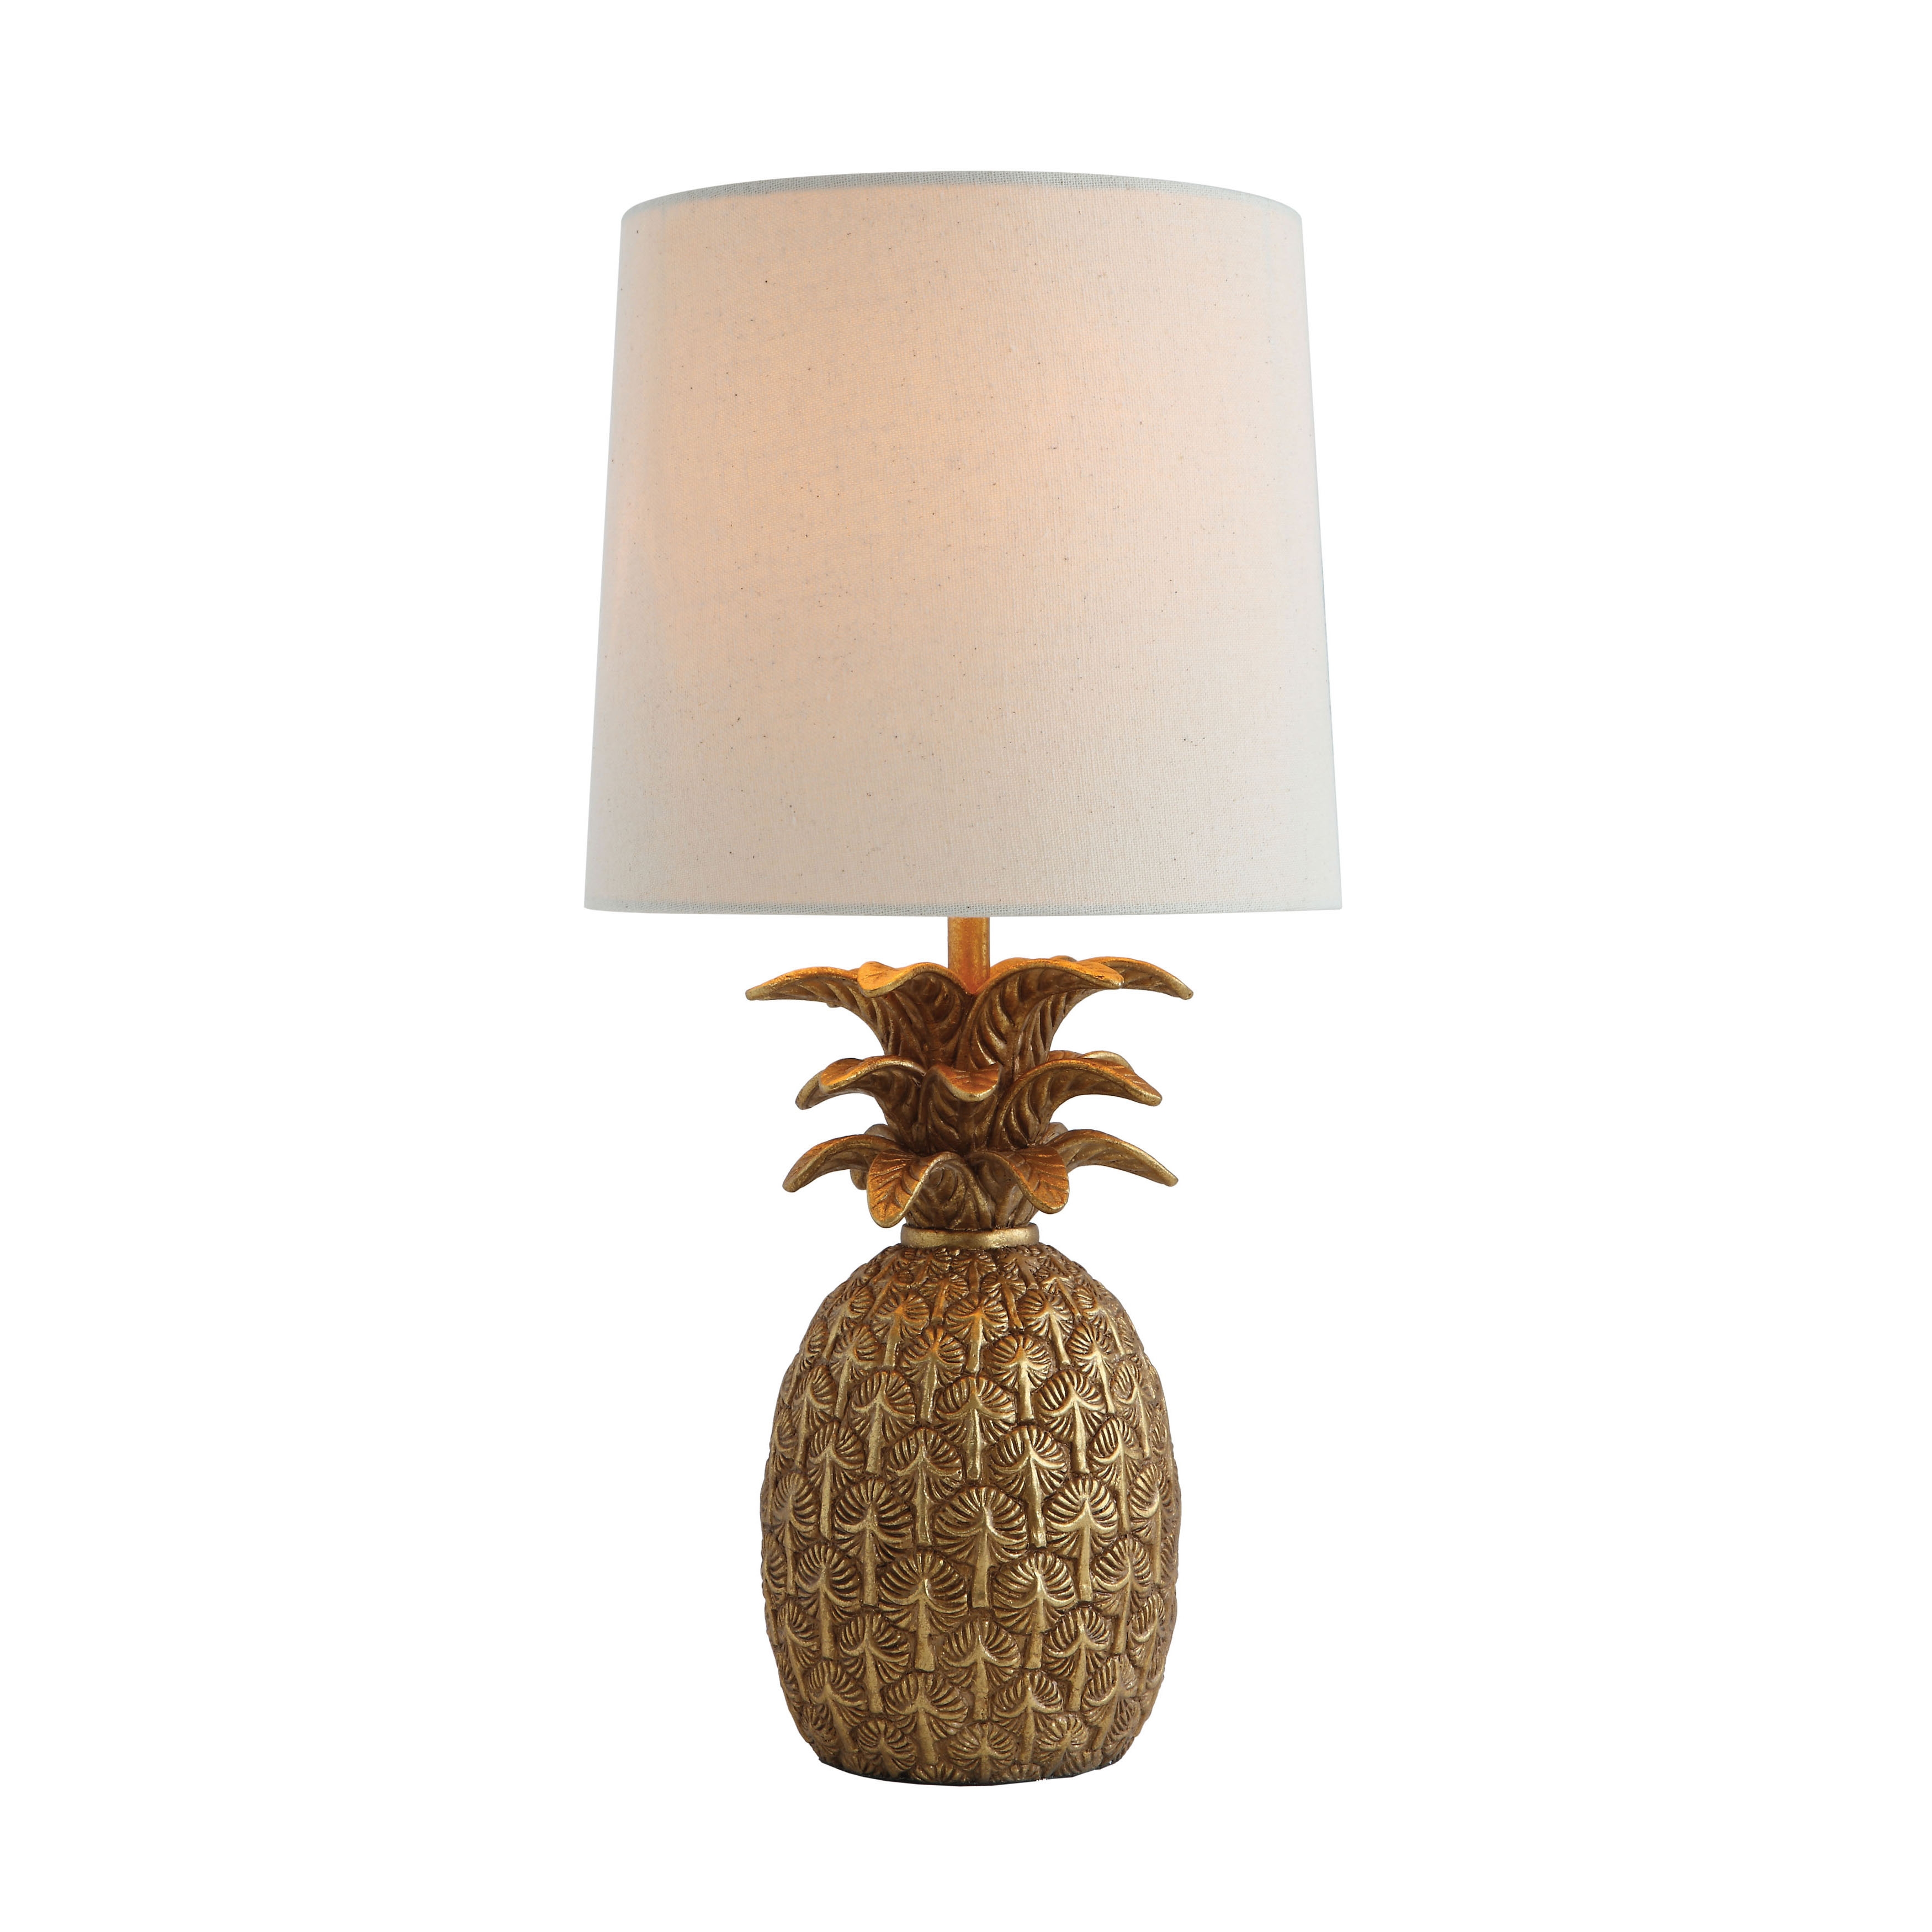 Resin Pineapple Shaped Table Lamp with Distressed Finish & Linen Shade - Image 0